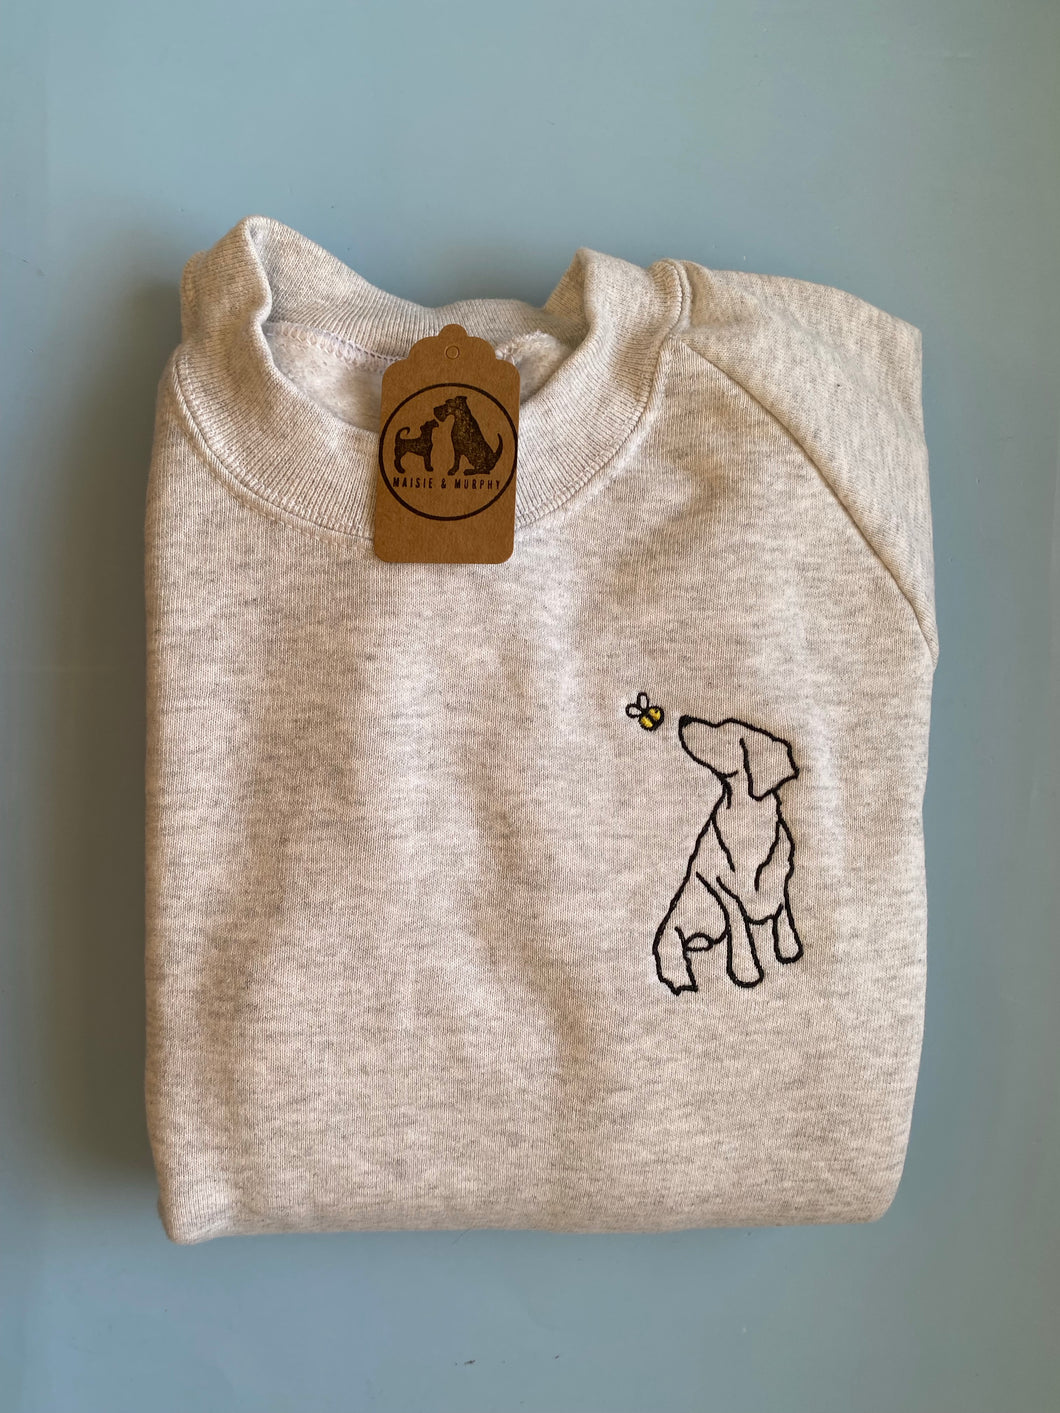 Spring Cocker Spaniel Outline Sweatshirt - Gifts for working cocker spaniel, water spaniel and alpine spaniel owners and lovers.